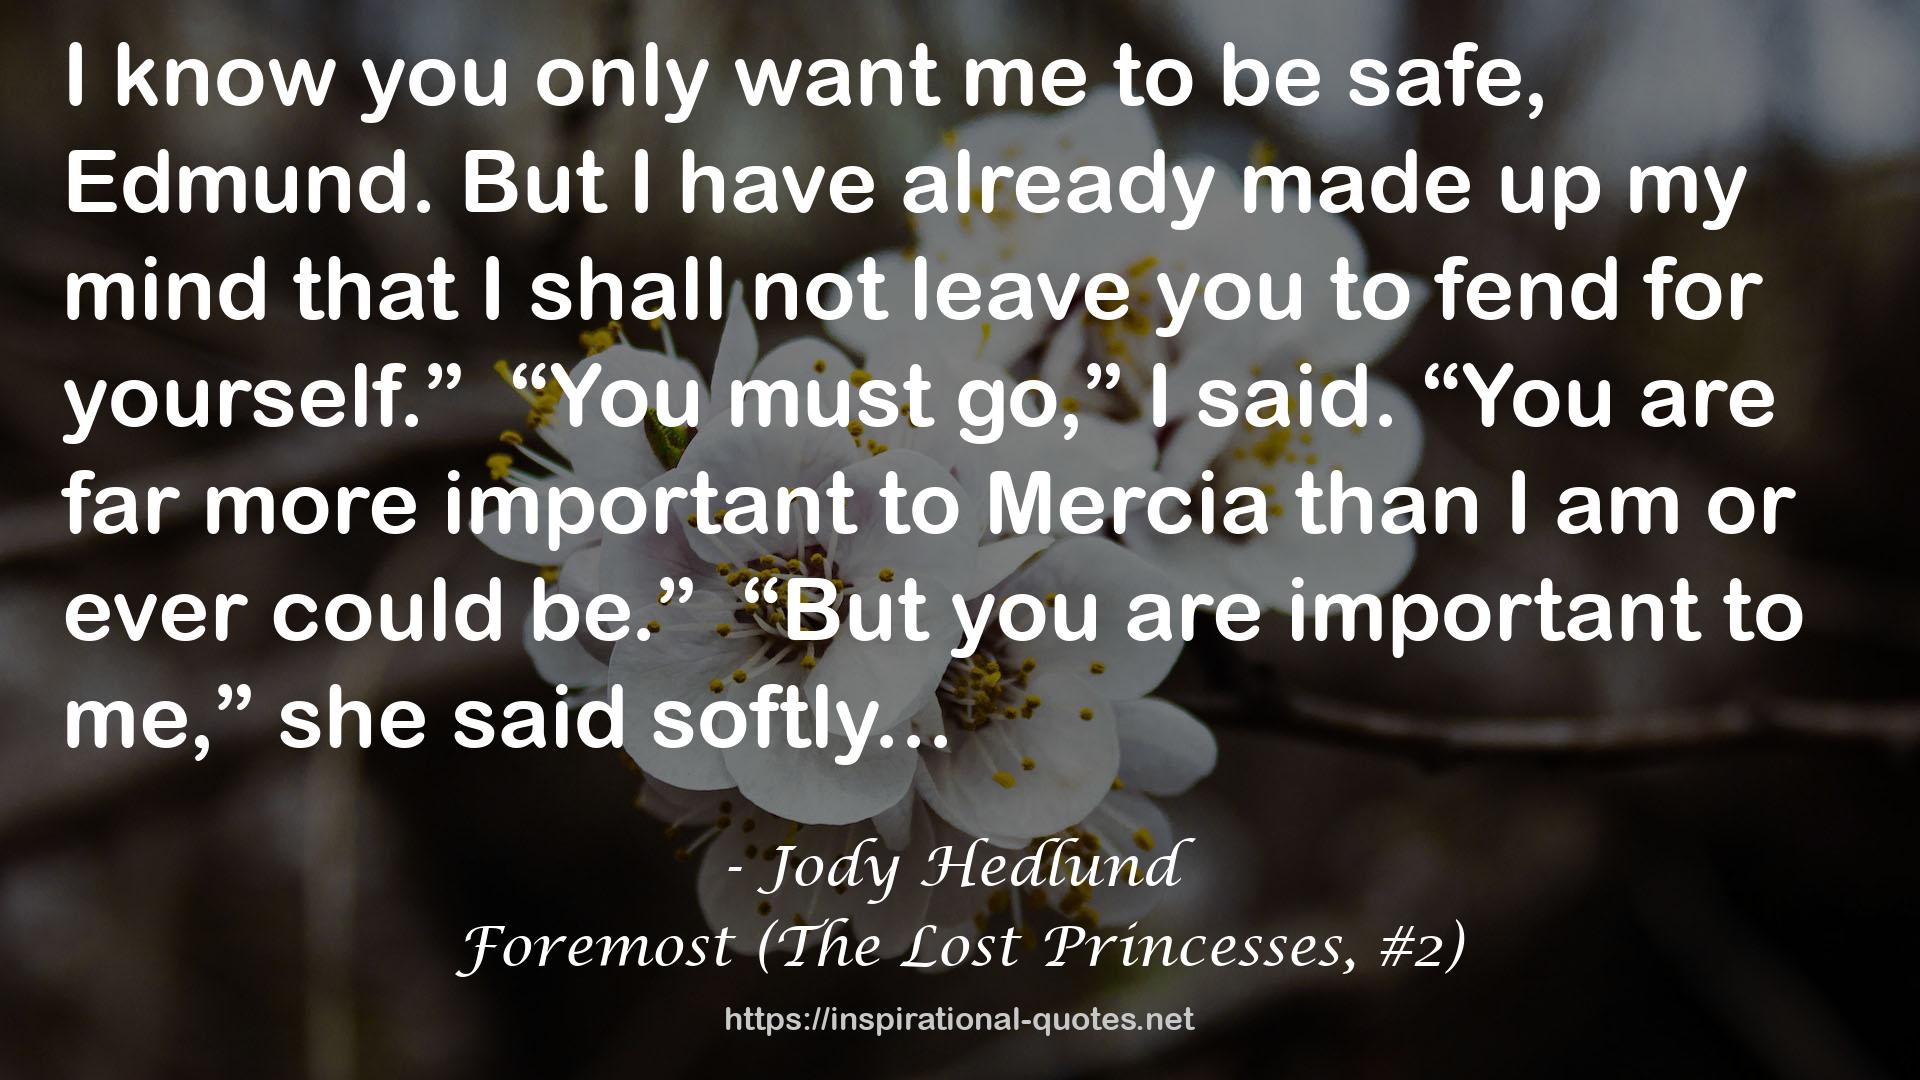 Foremost (The Lost Princesses, #2) QUOTES